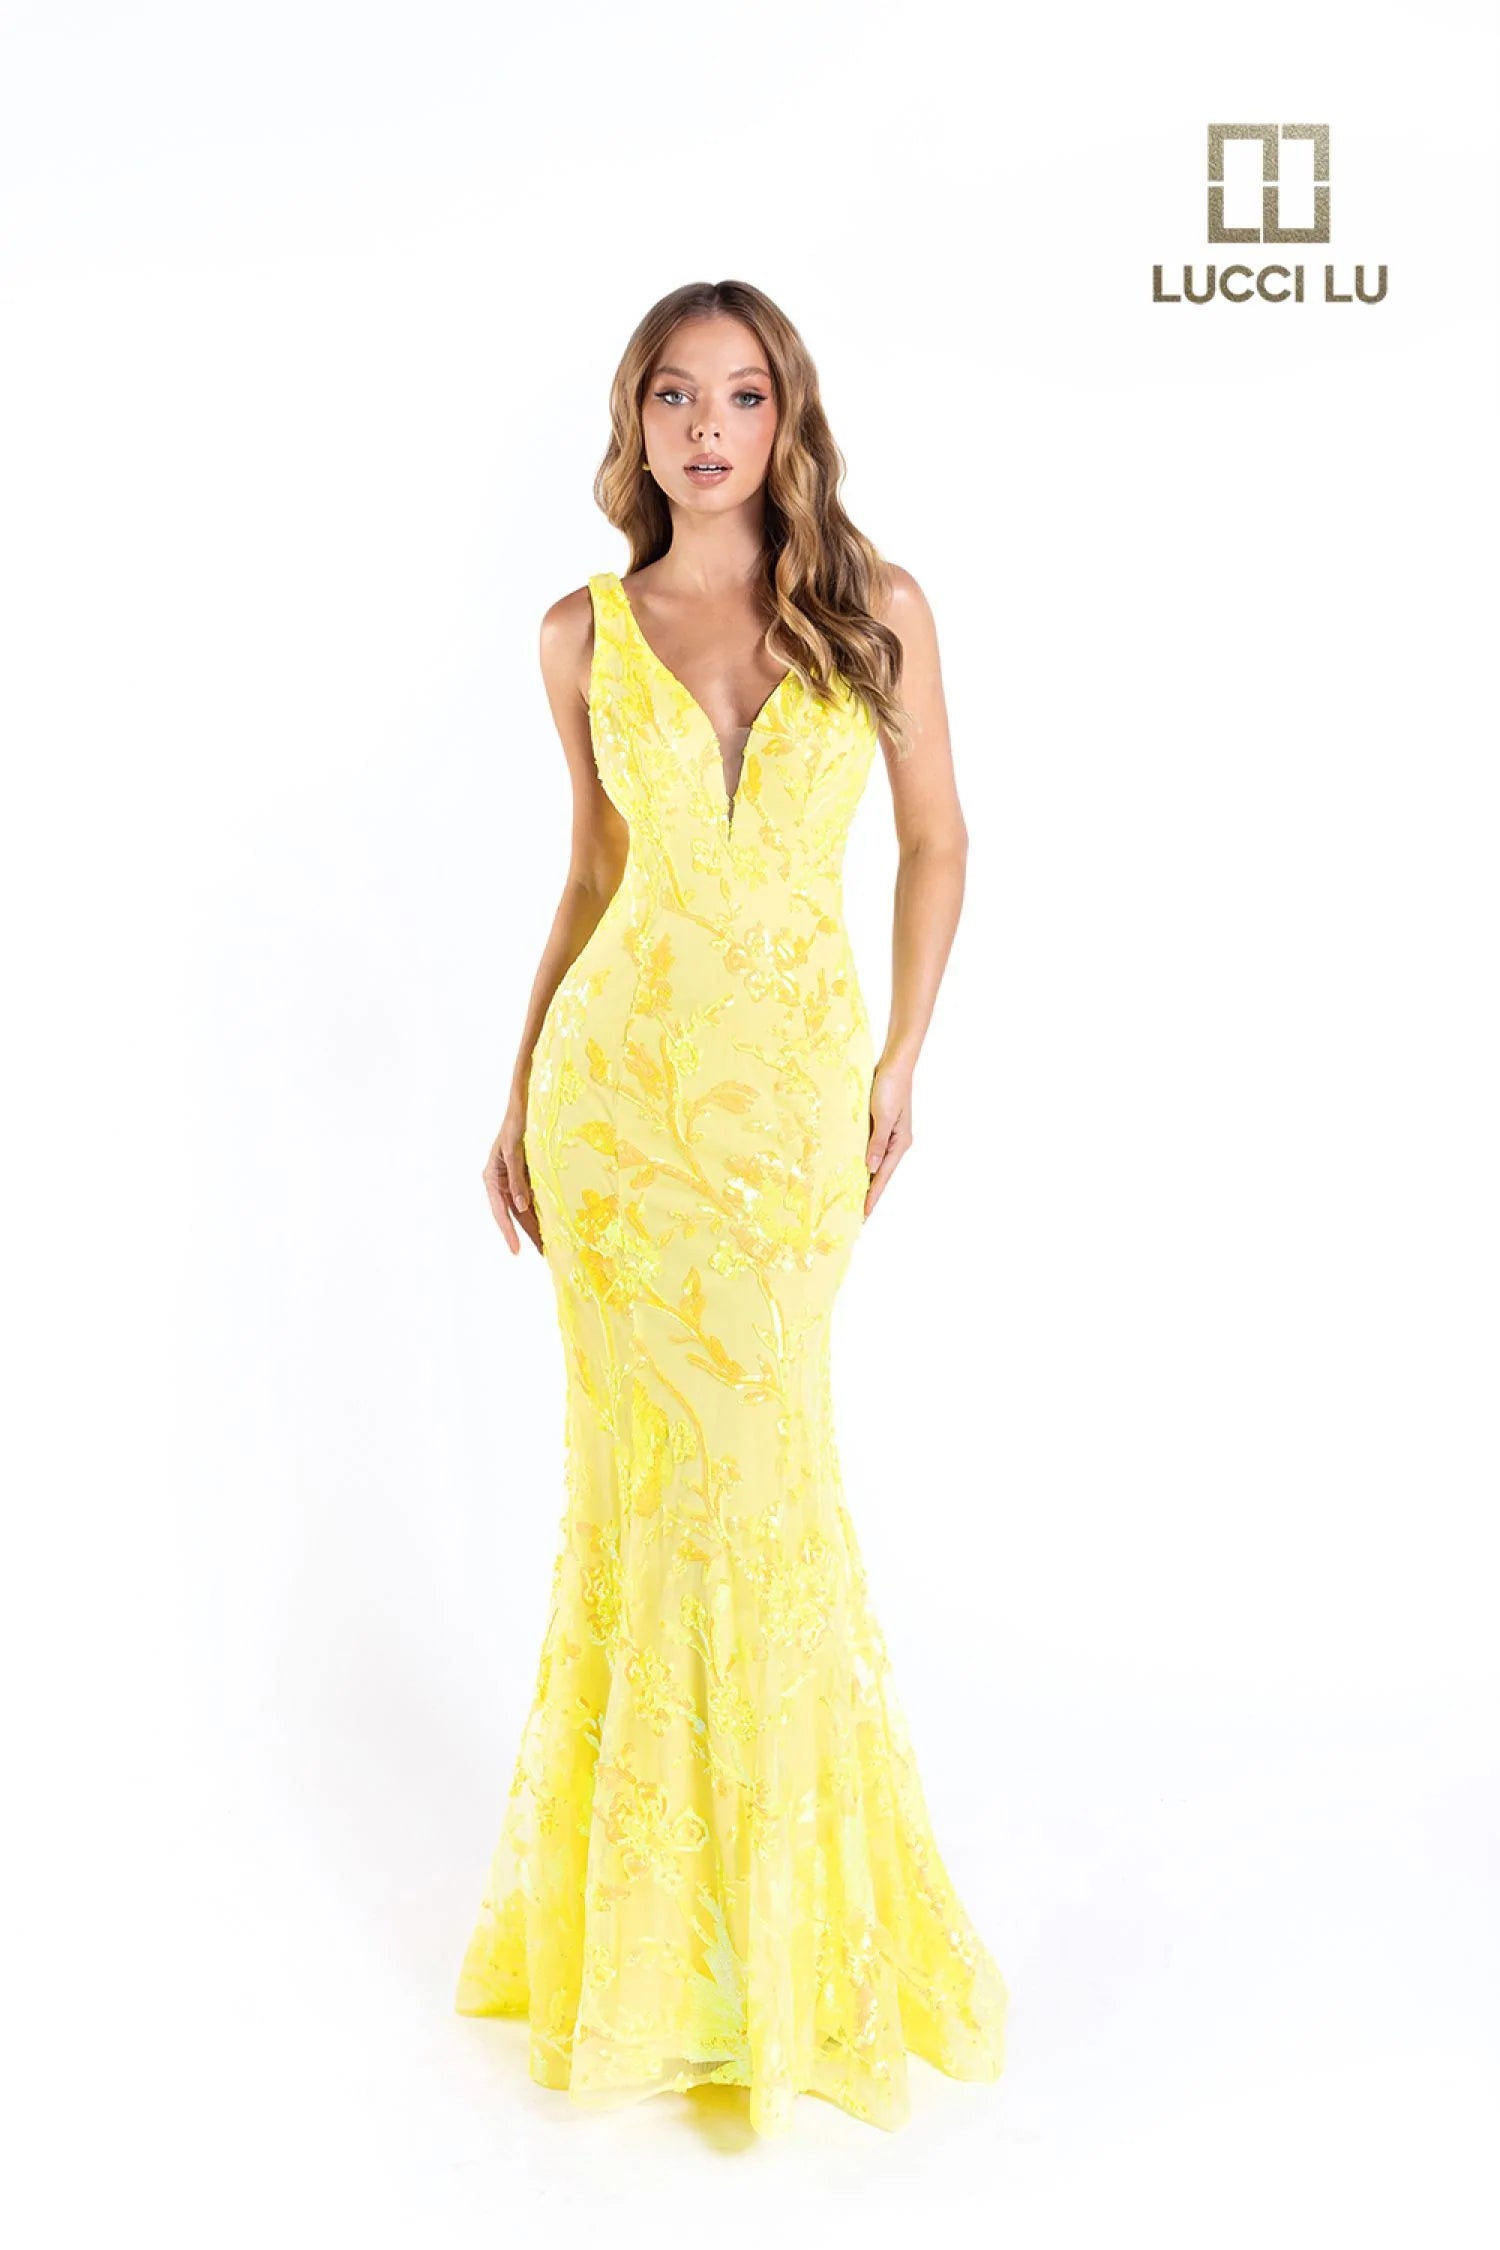 Lucci Lu 1230 Size 18 Neon Yellow Long Fitted Sequin Neon Prom Dress V Neck  Formal Pageant Gown Backless